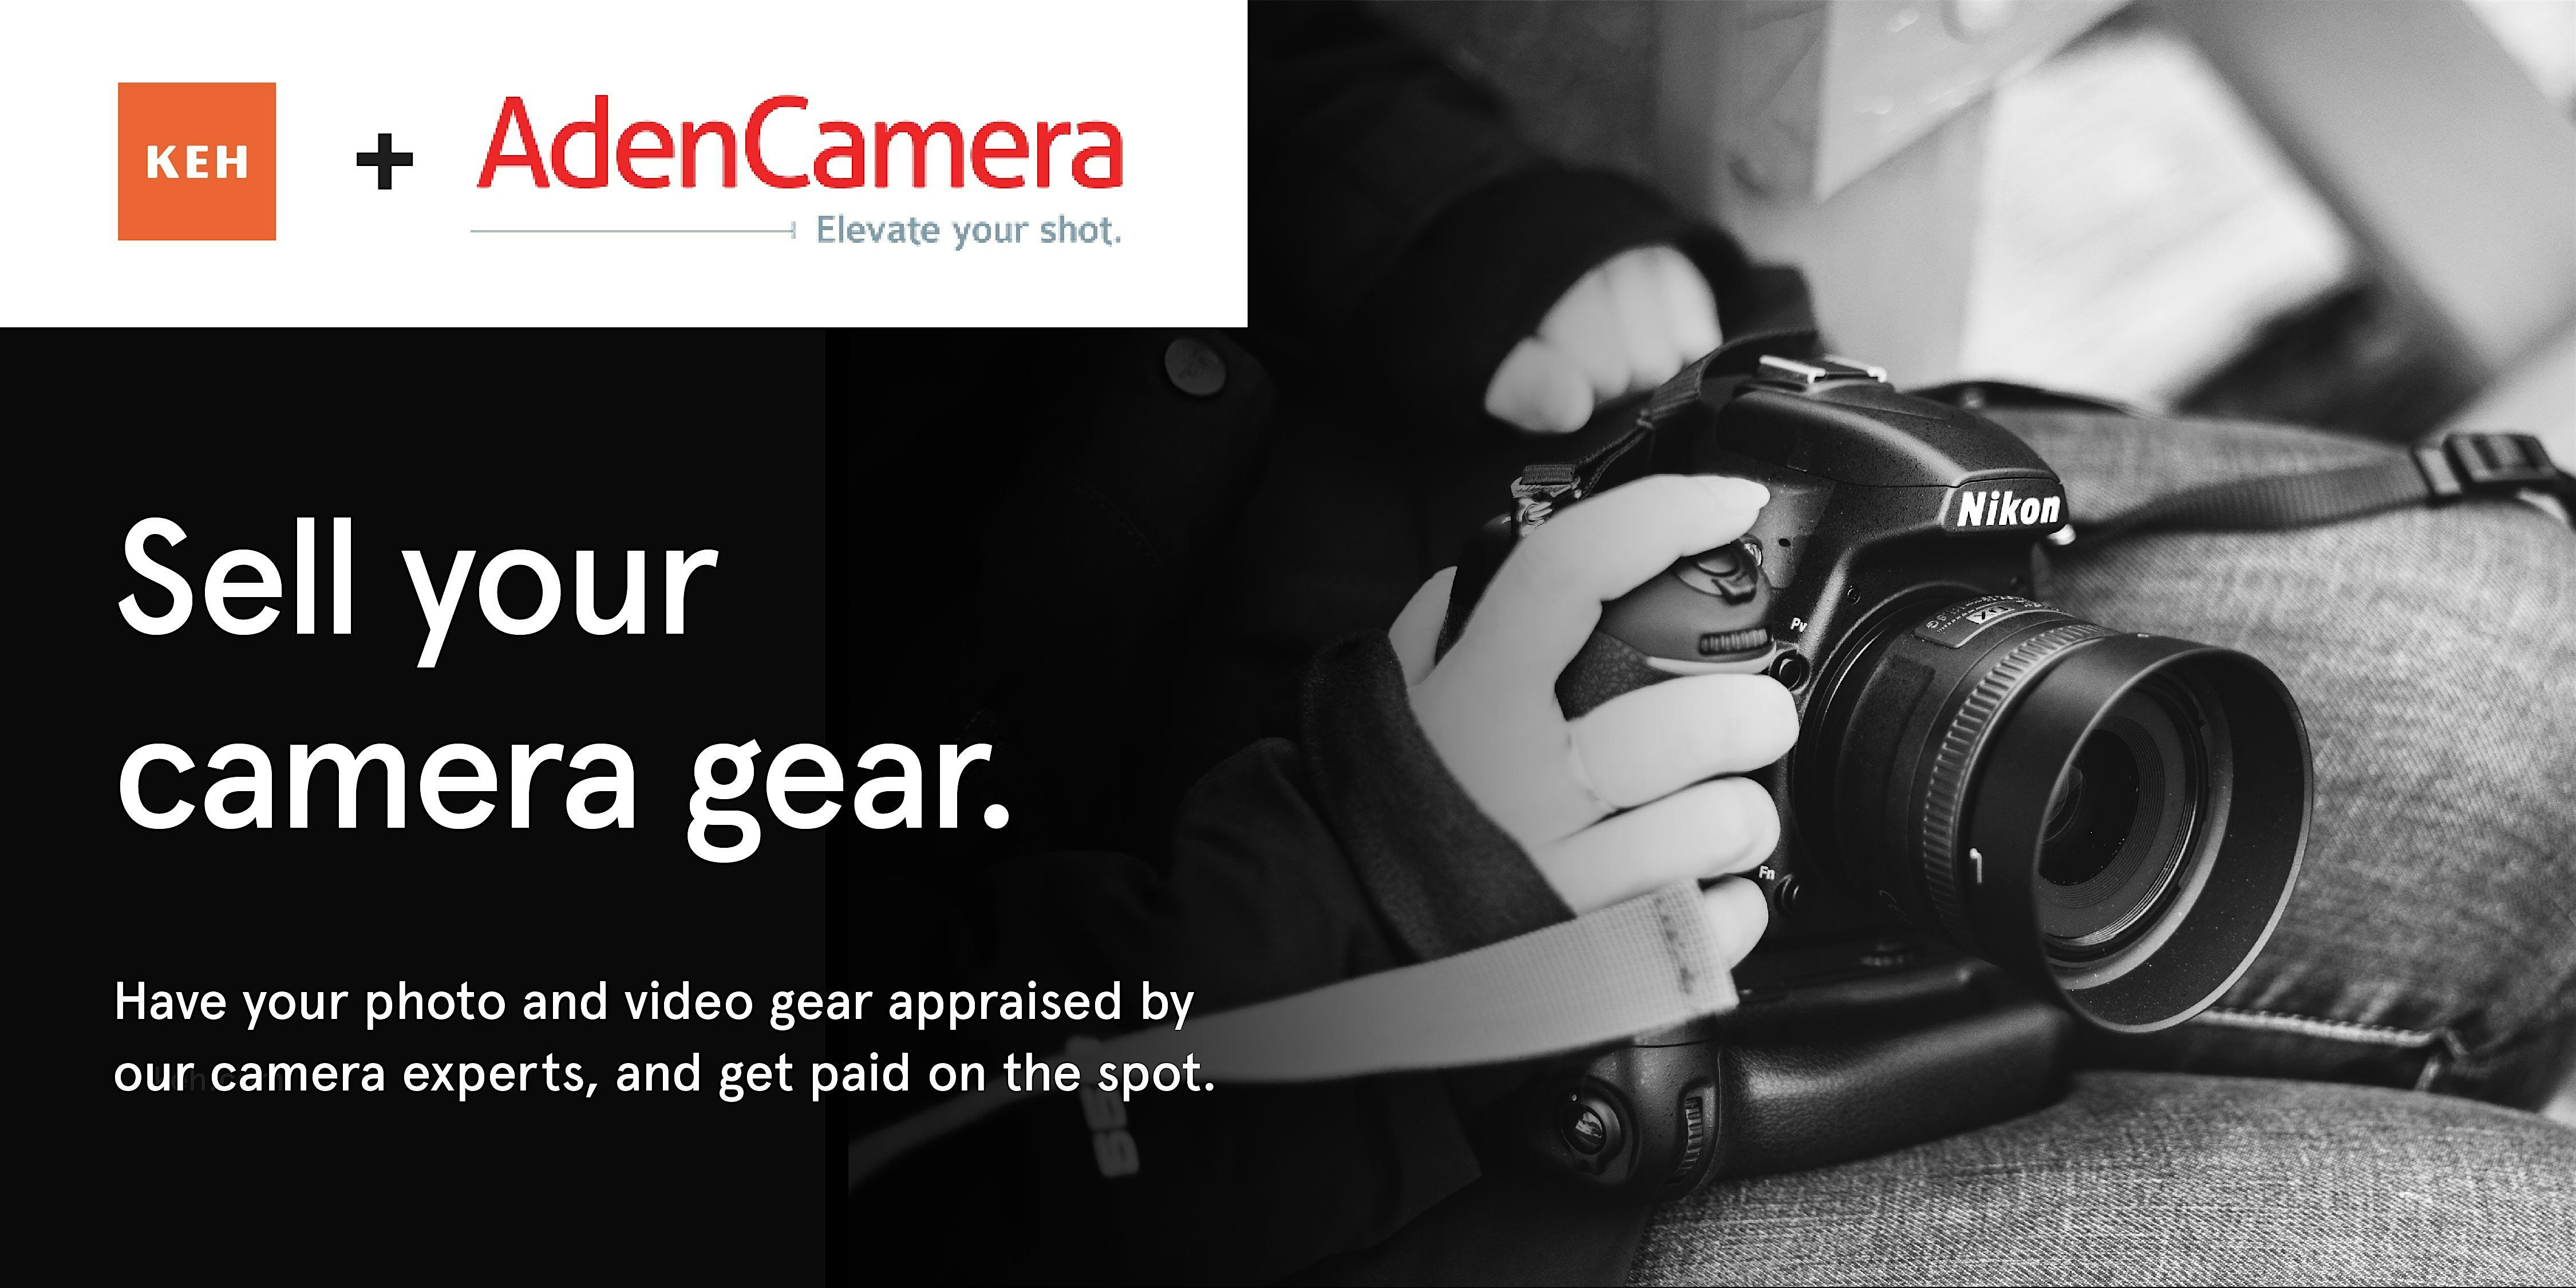 Sell your camera gear (free event) at Aden Camera